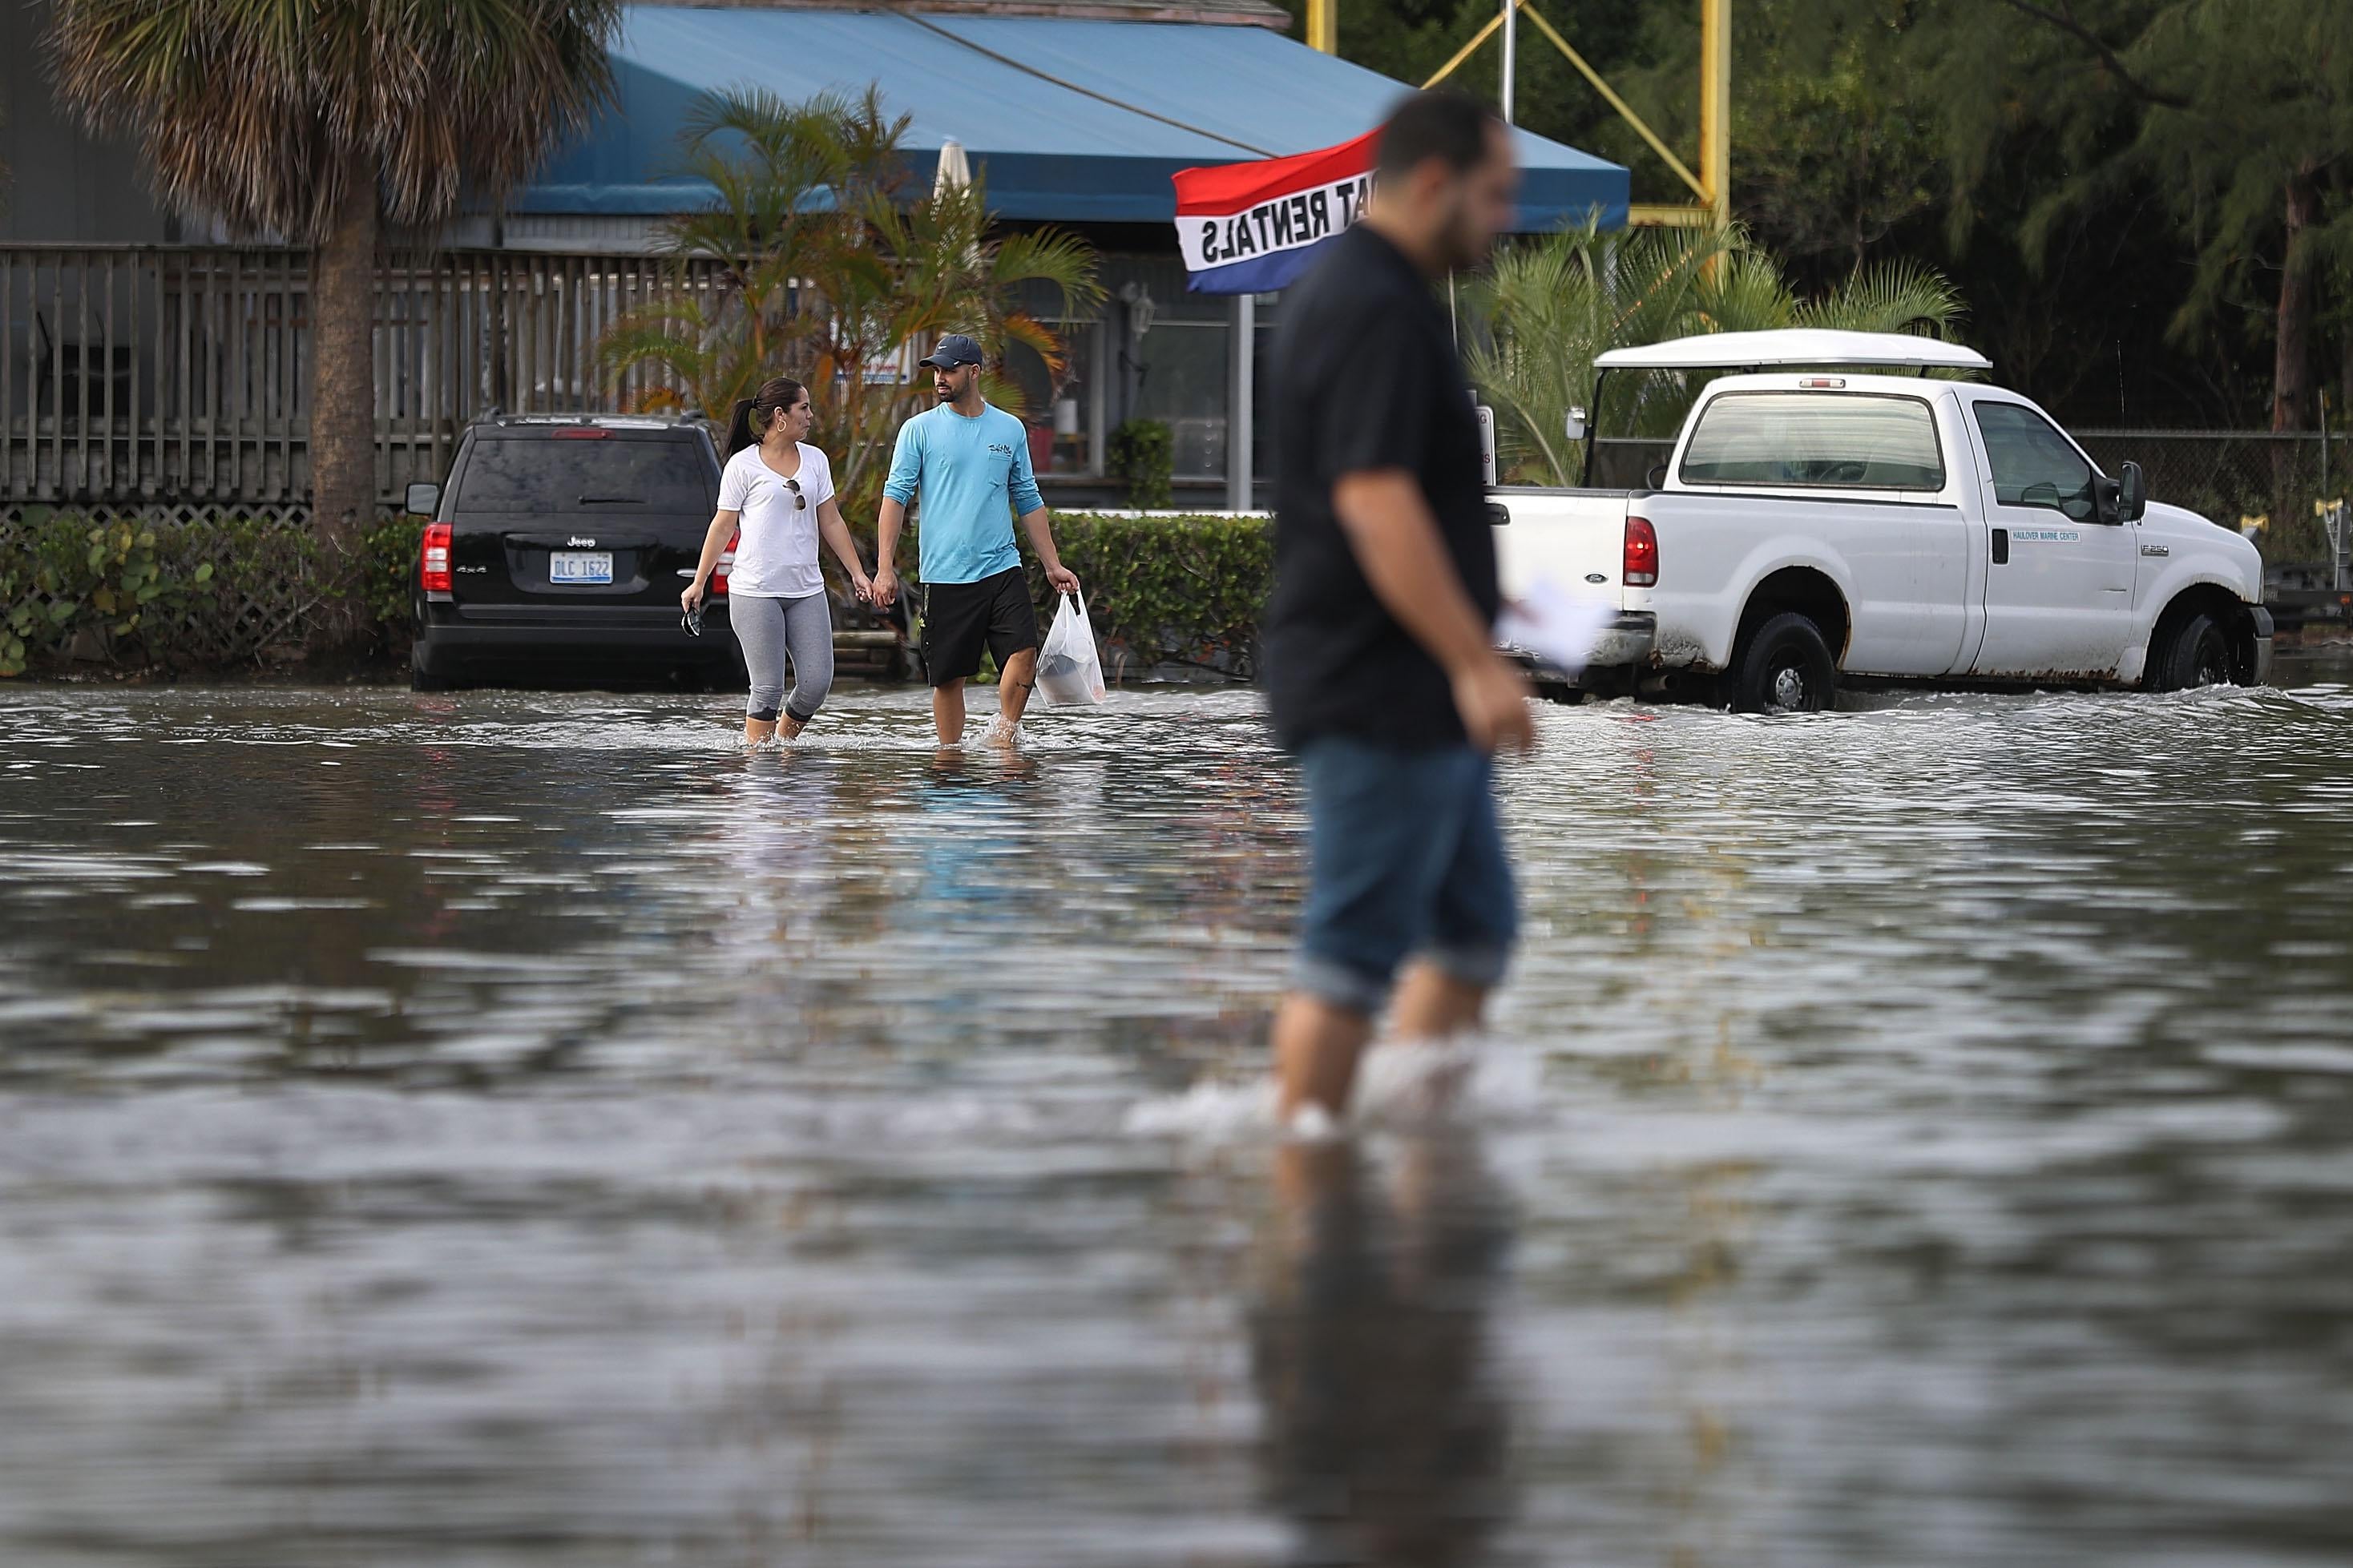 NORTH MIAMI, FL - NOVEMBER 14:  Yaneisy Duenas (L) and Ferando Sanudo walk through the flooded parking lot to their boat at the Haulover Marine Center on November 14, 2016 in North Miami, Florida. The flood waters are caused by the combination of the lunar orbit which causes seasonal high tides, also known as a King tide, and what some scientists believe is rising sea levels due to climate change.  (Photo by Joe Raedle/Getty Images)